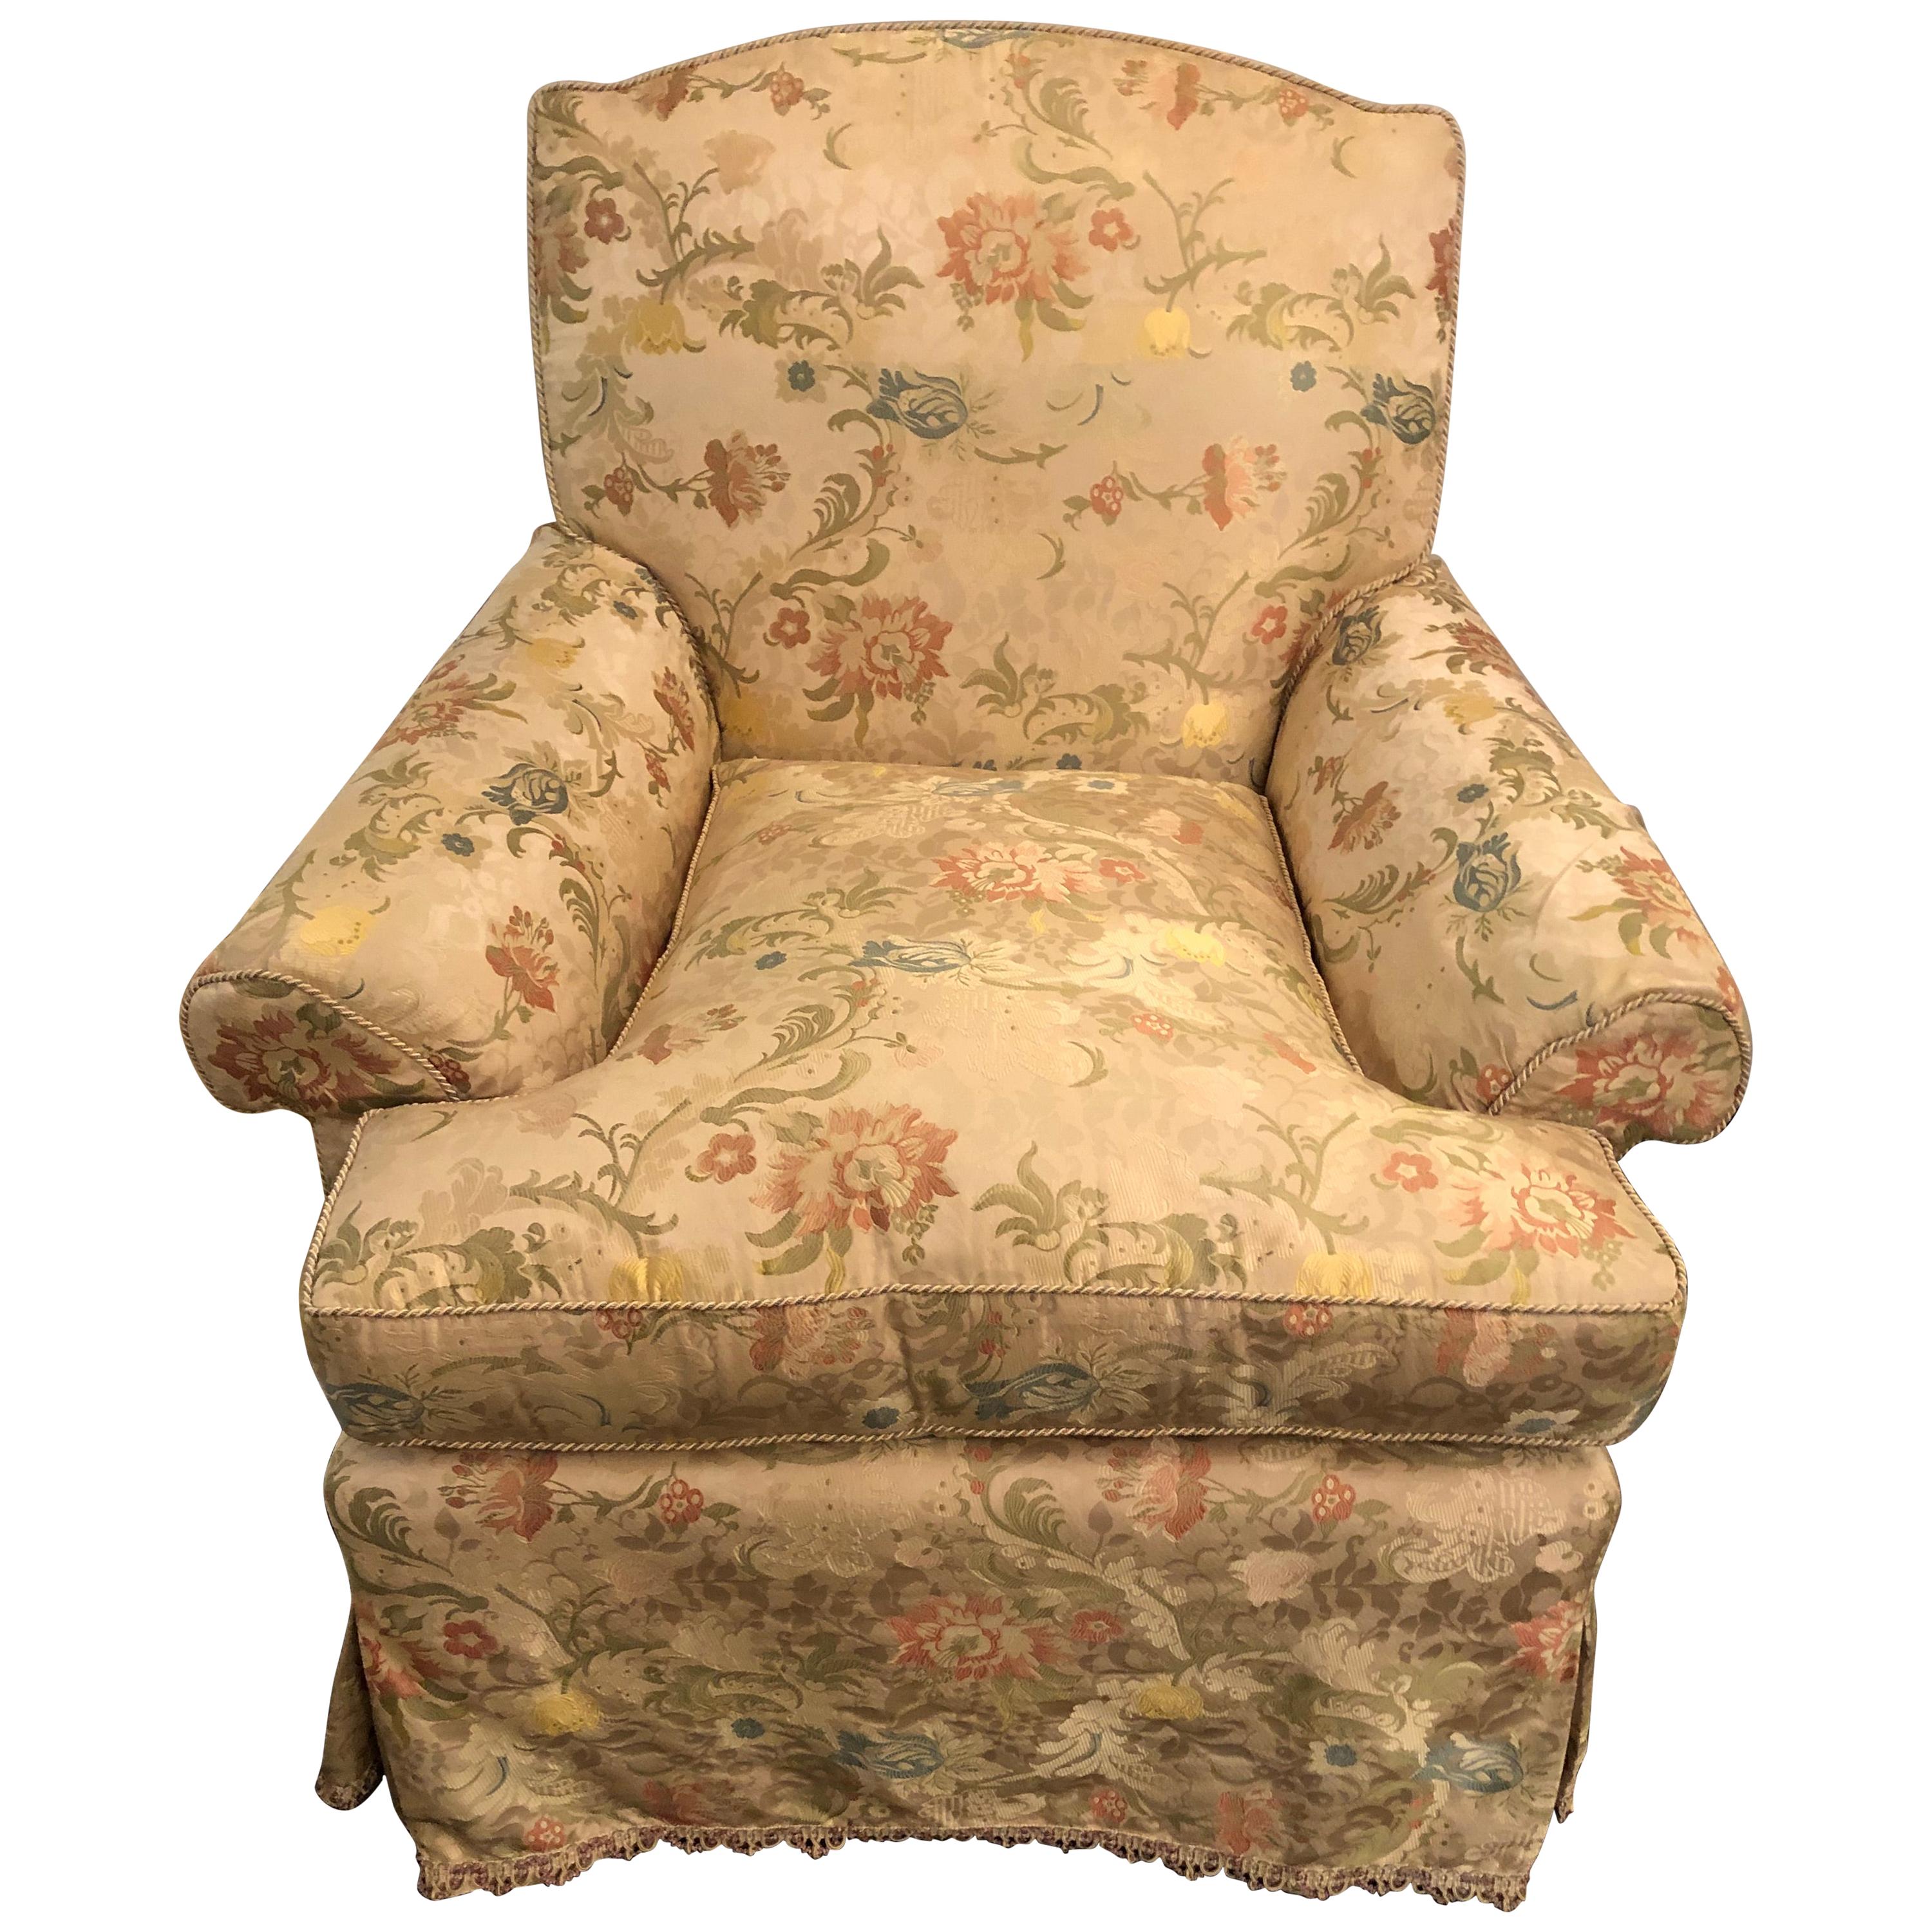 Magnificently Upholstered Overstuffed Armchair on Casters by O Henry House